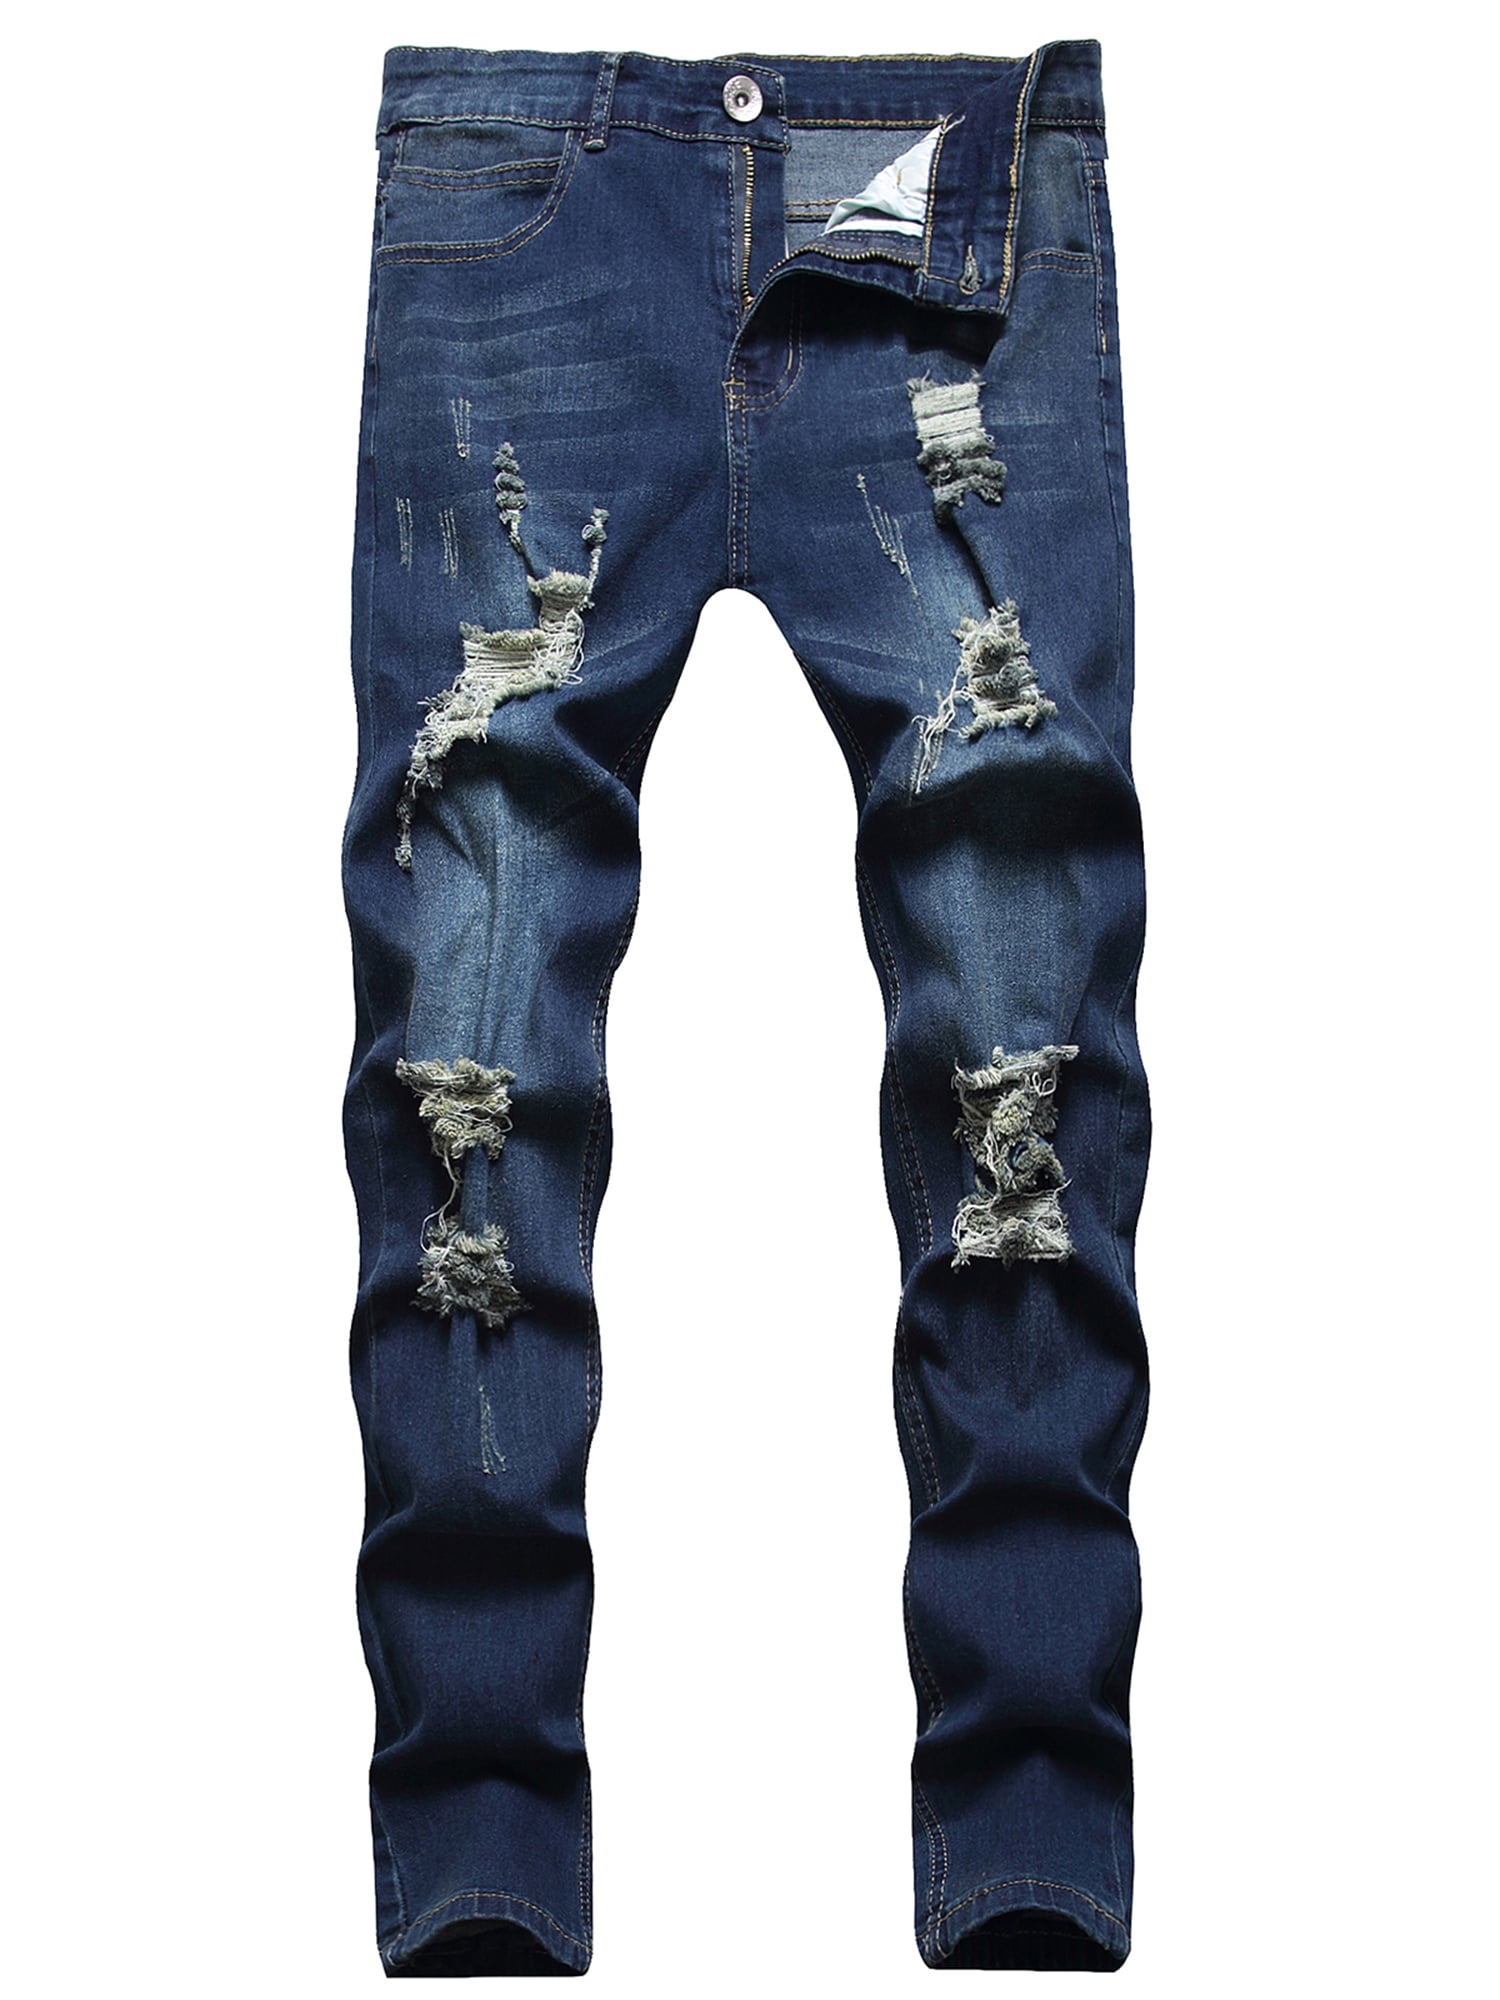 Eyicmarn Men's Ripped Slim-Fit Denim Trousers With Zipper Hip Hop ...